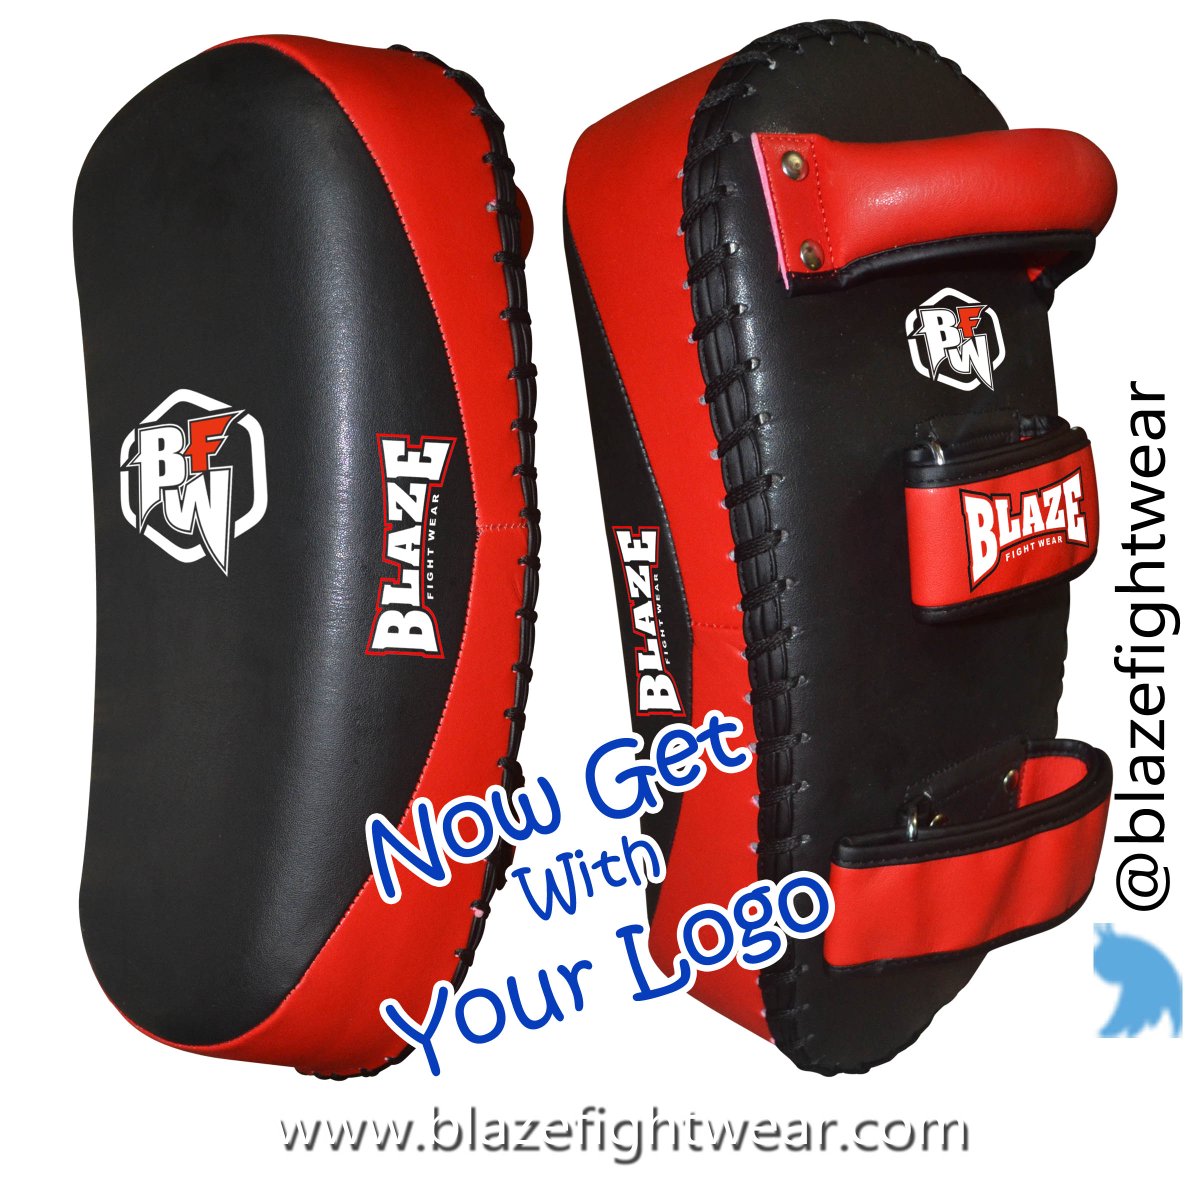 'BLAZE FIGHTWEAR'S'Thai Kick Pad
Descriptions:
Made of Synthetic Leather / Cowhide Leather